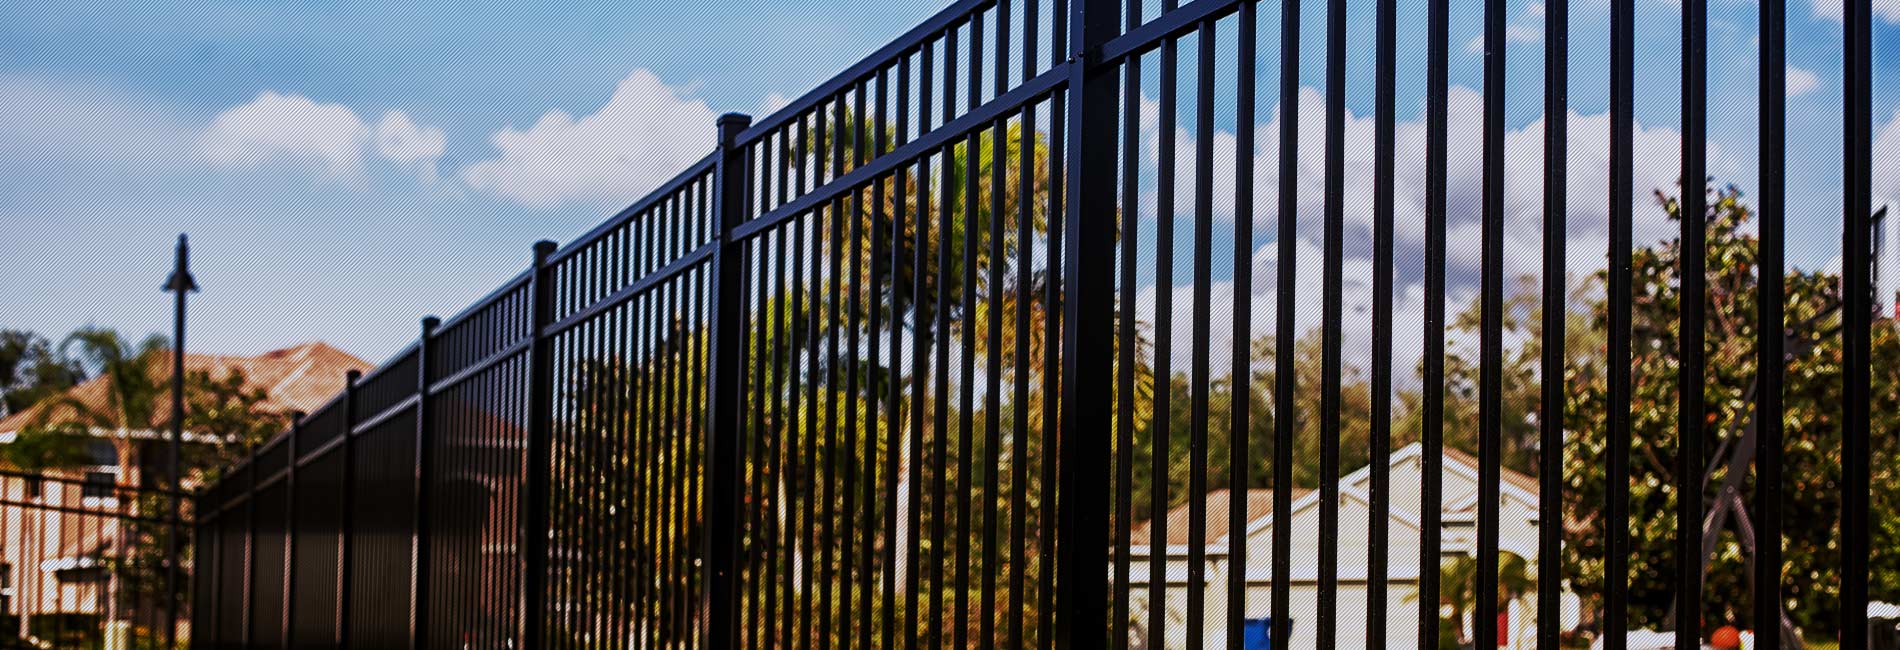 Cost of Aluminum Fencing Material for Florida Homes and Businesses